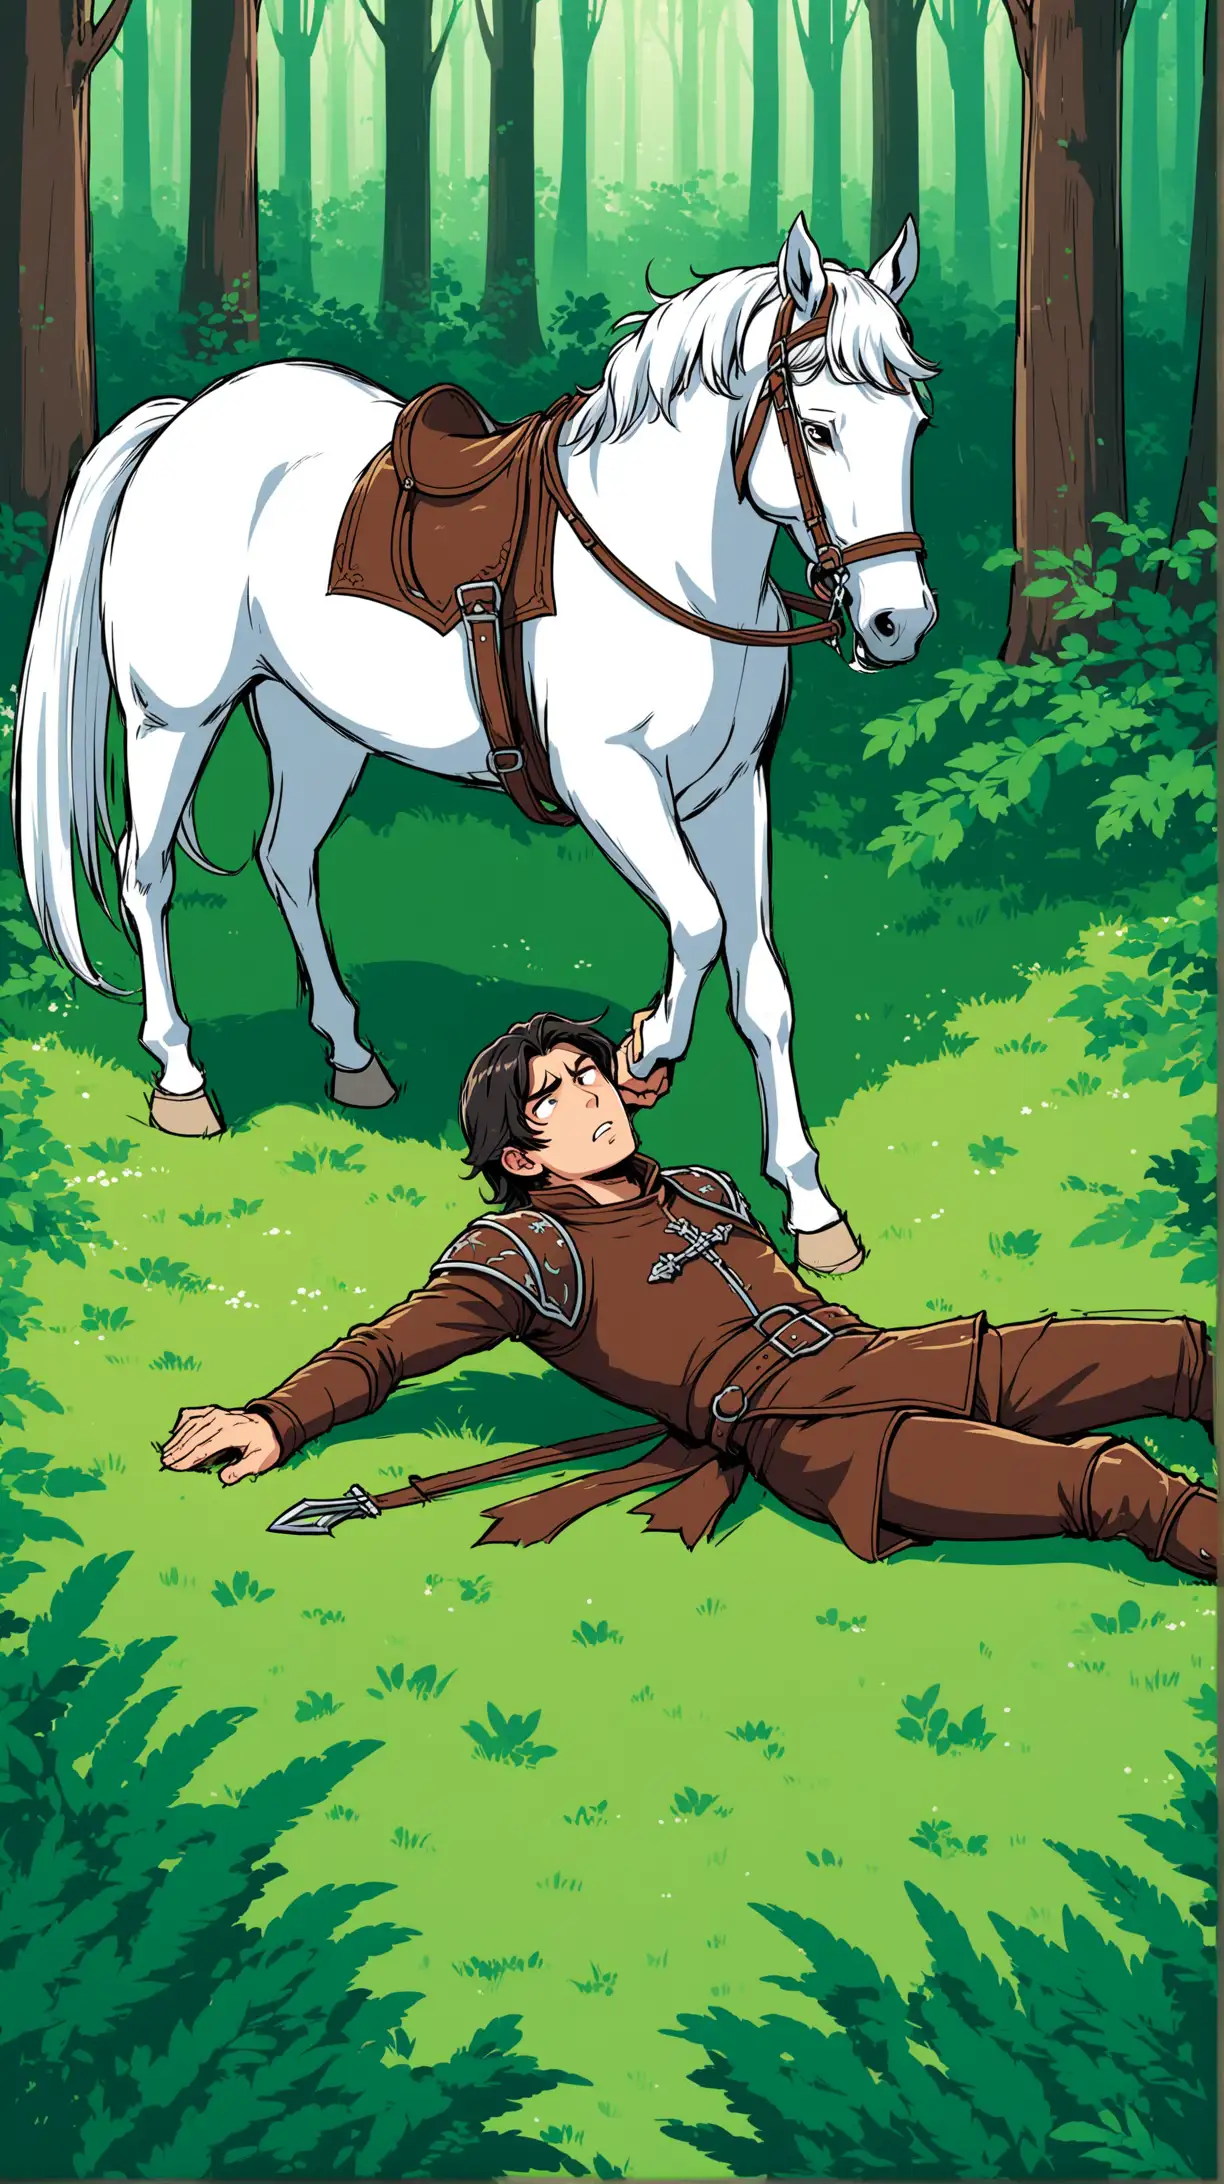 cartoony color. A hansome dark haired, brown leather clad medieval rider is hurt and on the ground  in a lush forest.   His white horse looks at him like he's an idiot
